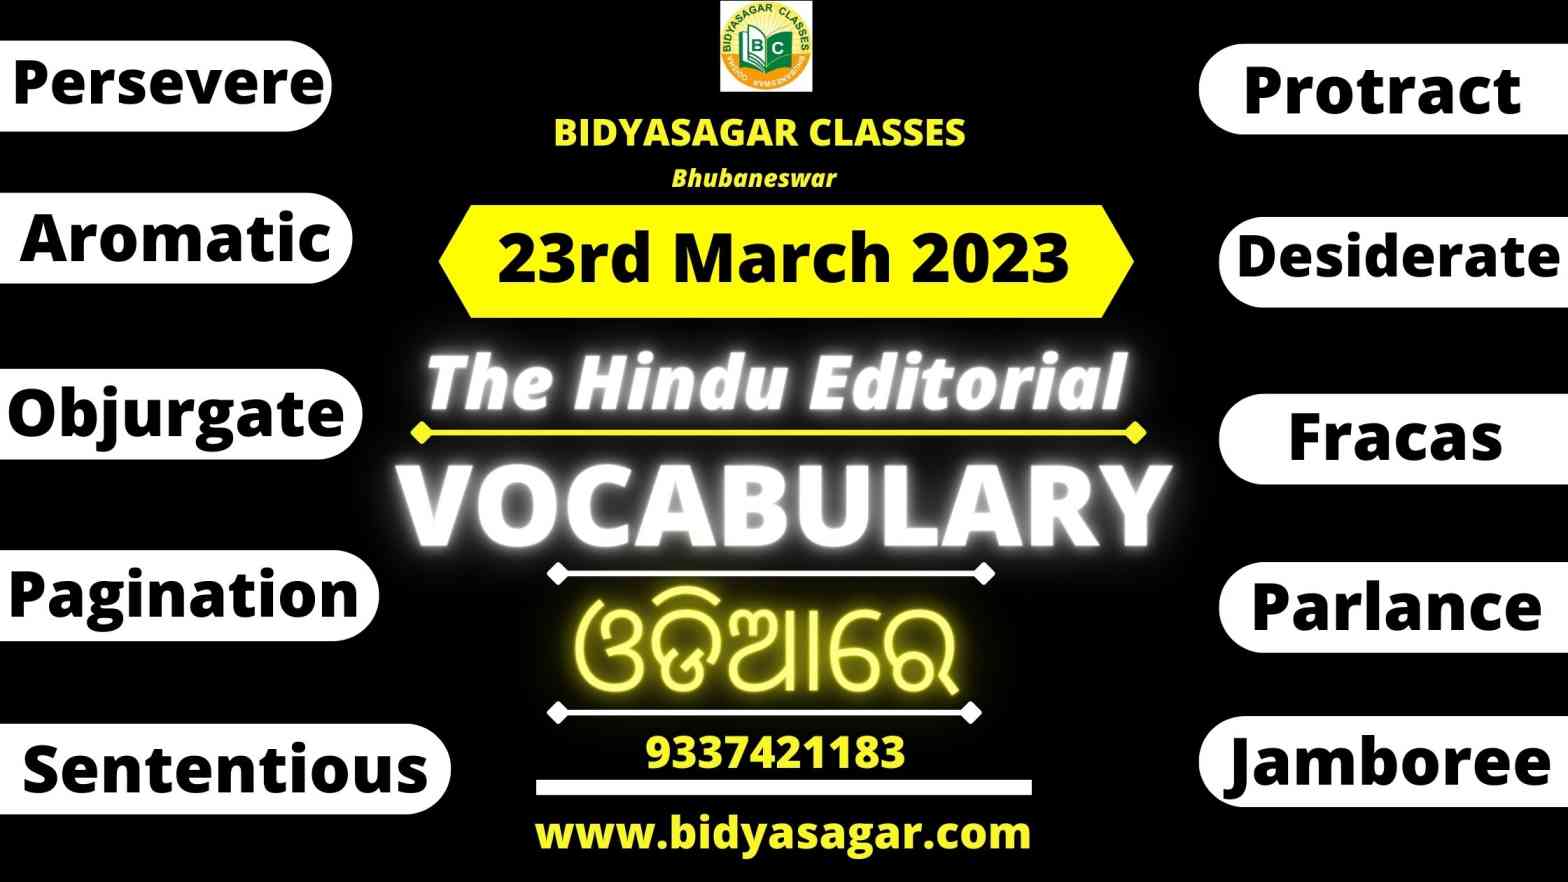 The Hindu Editorial Vocabulary of 23rd March 2023